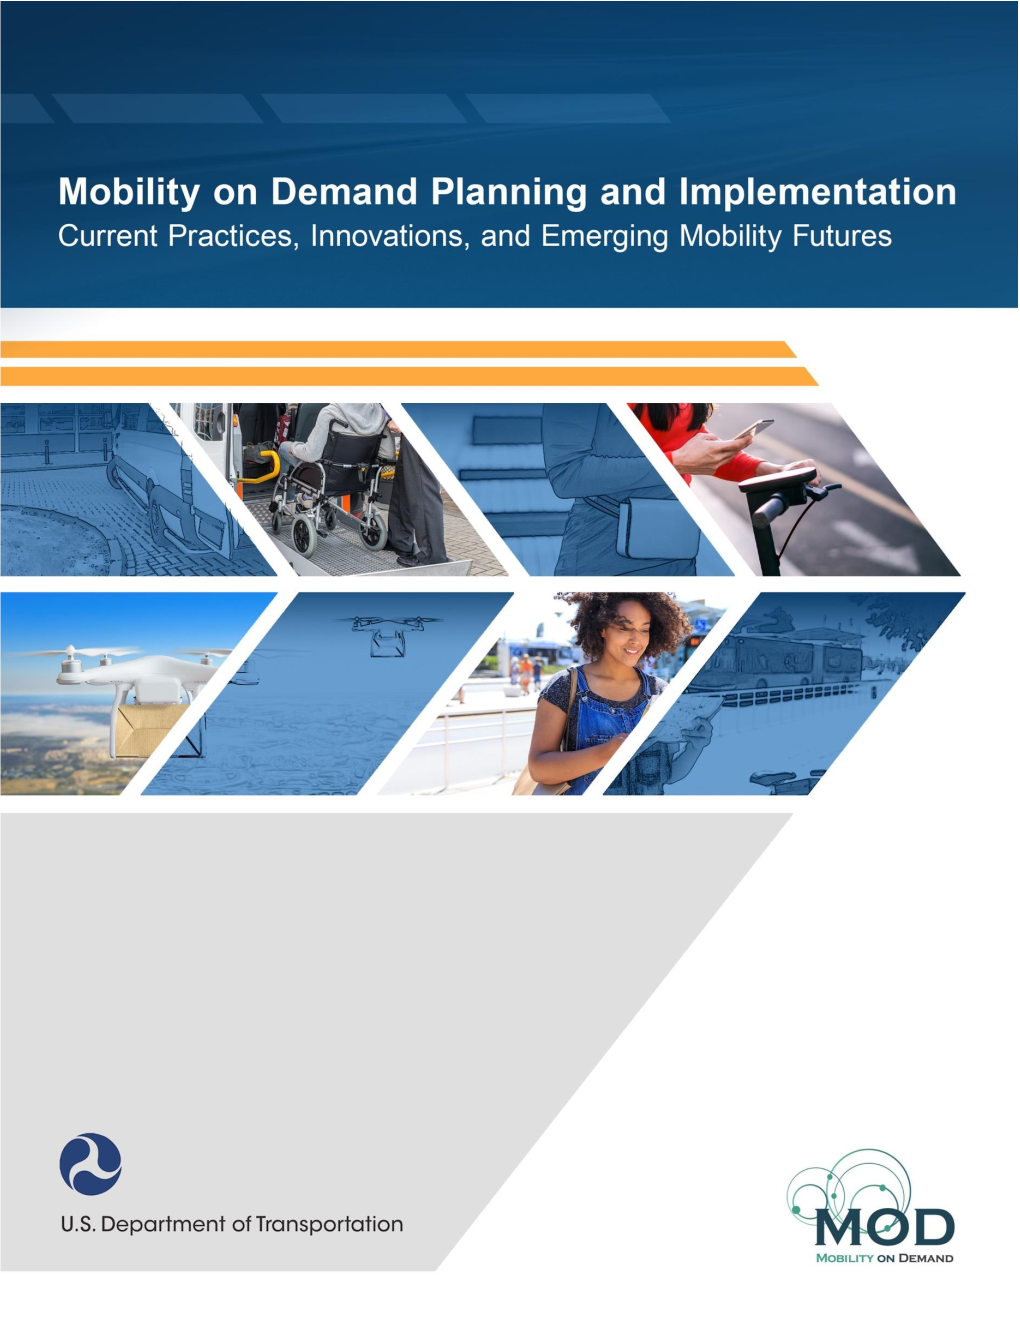 Current Practices, Innovations, and Emerging Mobility Futures